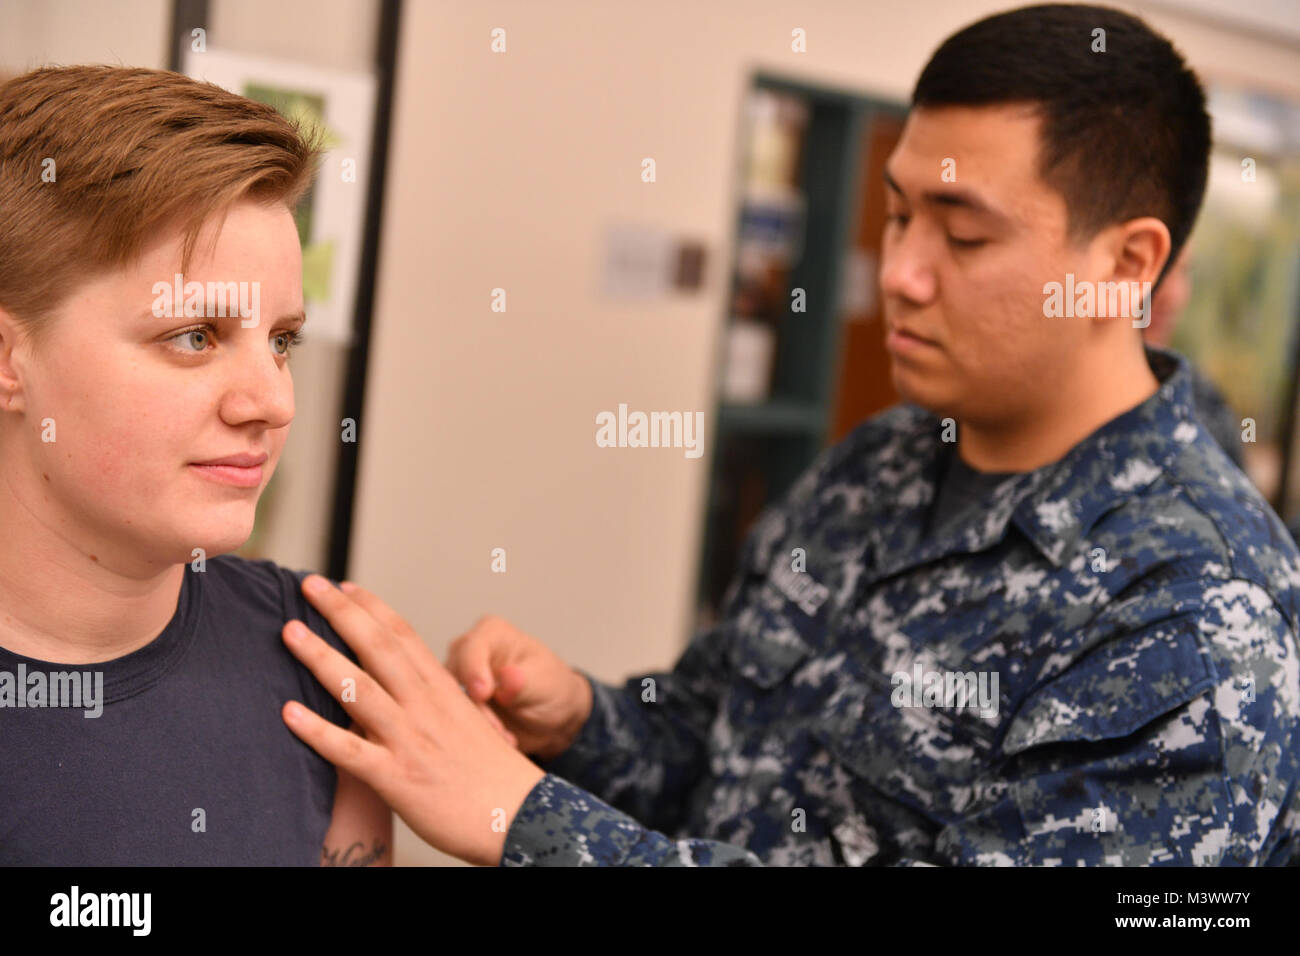 171101-N-JT254-014 SILVERDALE, Wash. (November 01, 2017) Hospital Corpsman Seaman Adrian Bermudez assigned to Naval Hospital Bremerton, administers a flu vaccine to Aviation Ordnancemen 1st Class Ashley Walicki, assigned to Naval Base Kitsap-Bangor Transient Personnel Unit.  Influenza, or 'the flu”, has the potential to adversely impact Navy force readiness and mission execution, and vaccination is mandatory for DoD uniformed personnel. (U.S. Navy photo by Mass Communication Specialist Seaman Christopher Jahnke) 171101-N-JT254-014 by Naval Base Kitsap (NBK) Stock Photo